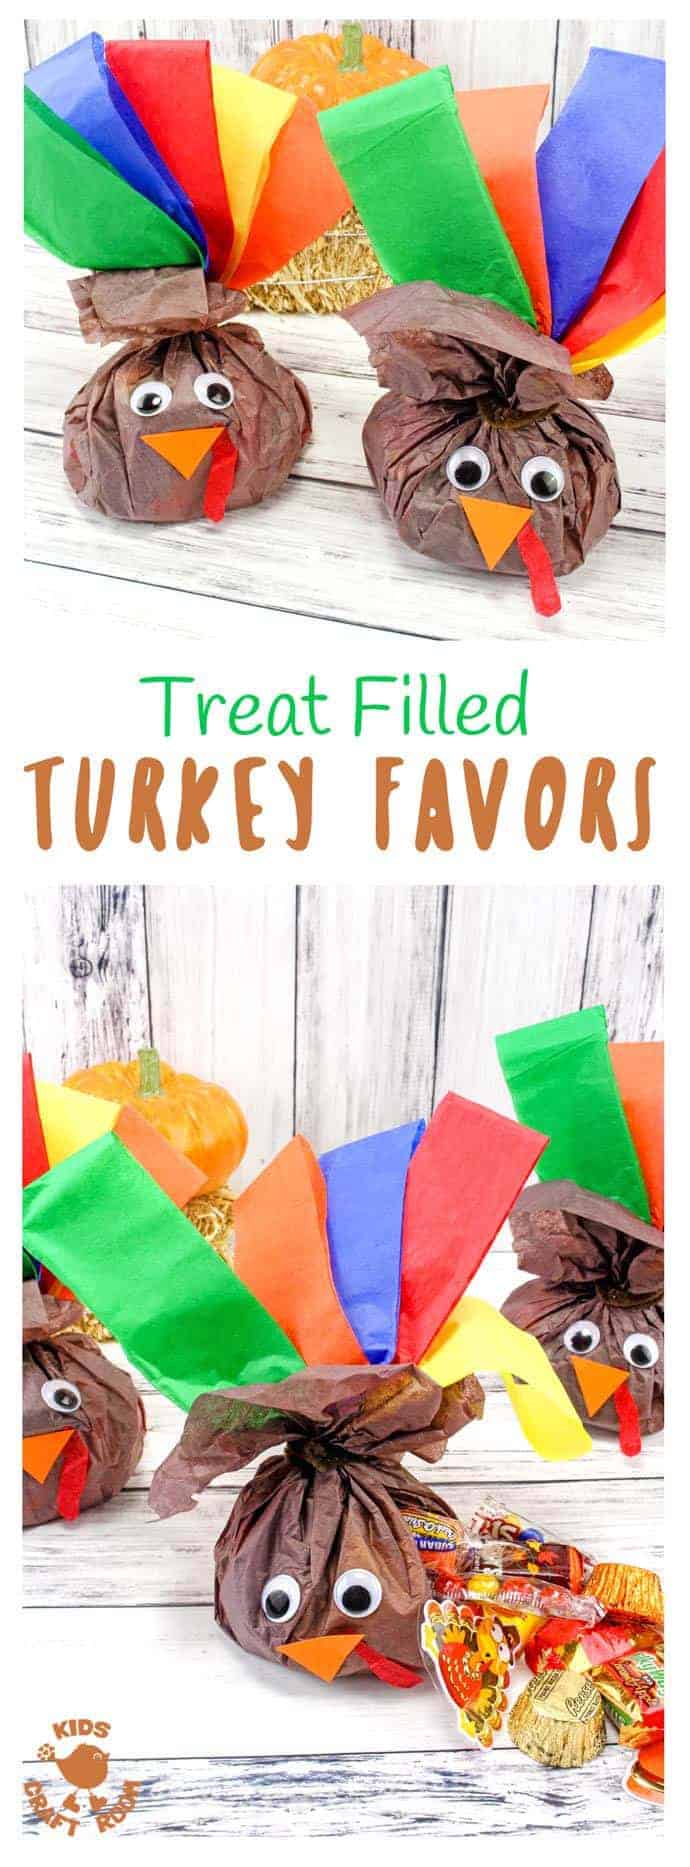 CANDY-FILLED TURKEY FAVORS - stuff this cute turkey craft with everyone's favorite Fall candies and they'll be gobbled up before you can say "Thanksgiving Treat"! Candy stuffed Turkey Favours are super simple and so much fun! Kids will love to make them and give them to their friends and they'll look super adorable in everyone's place setting for Thanksgiving dinner.